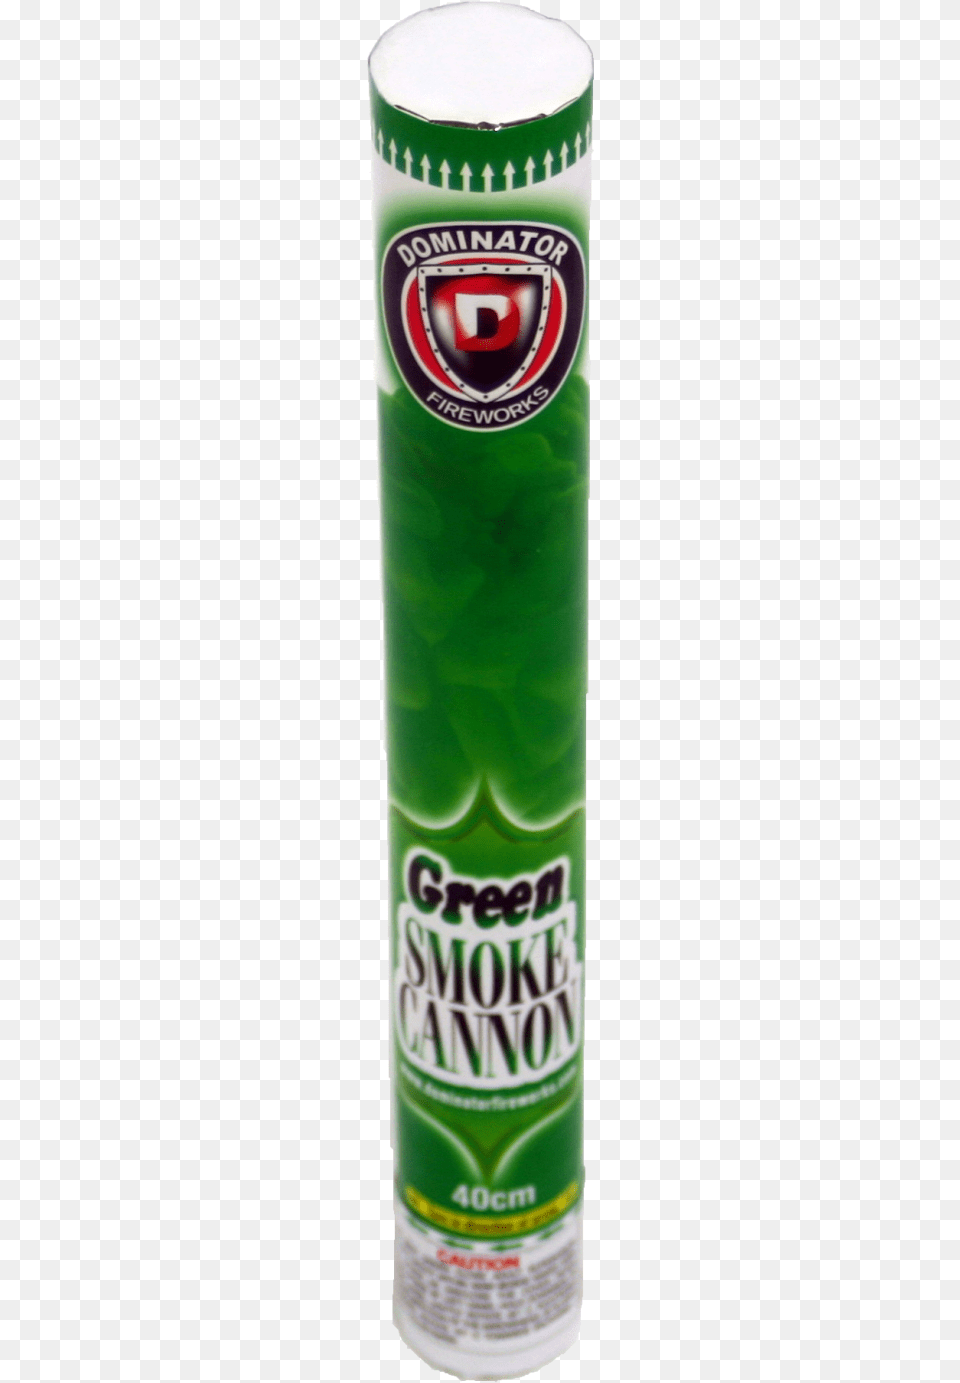 Smoke Cannon 40cm Green 4 Gram, Alcohol, Beer, Beverage, Tin Free Png